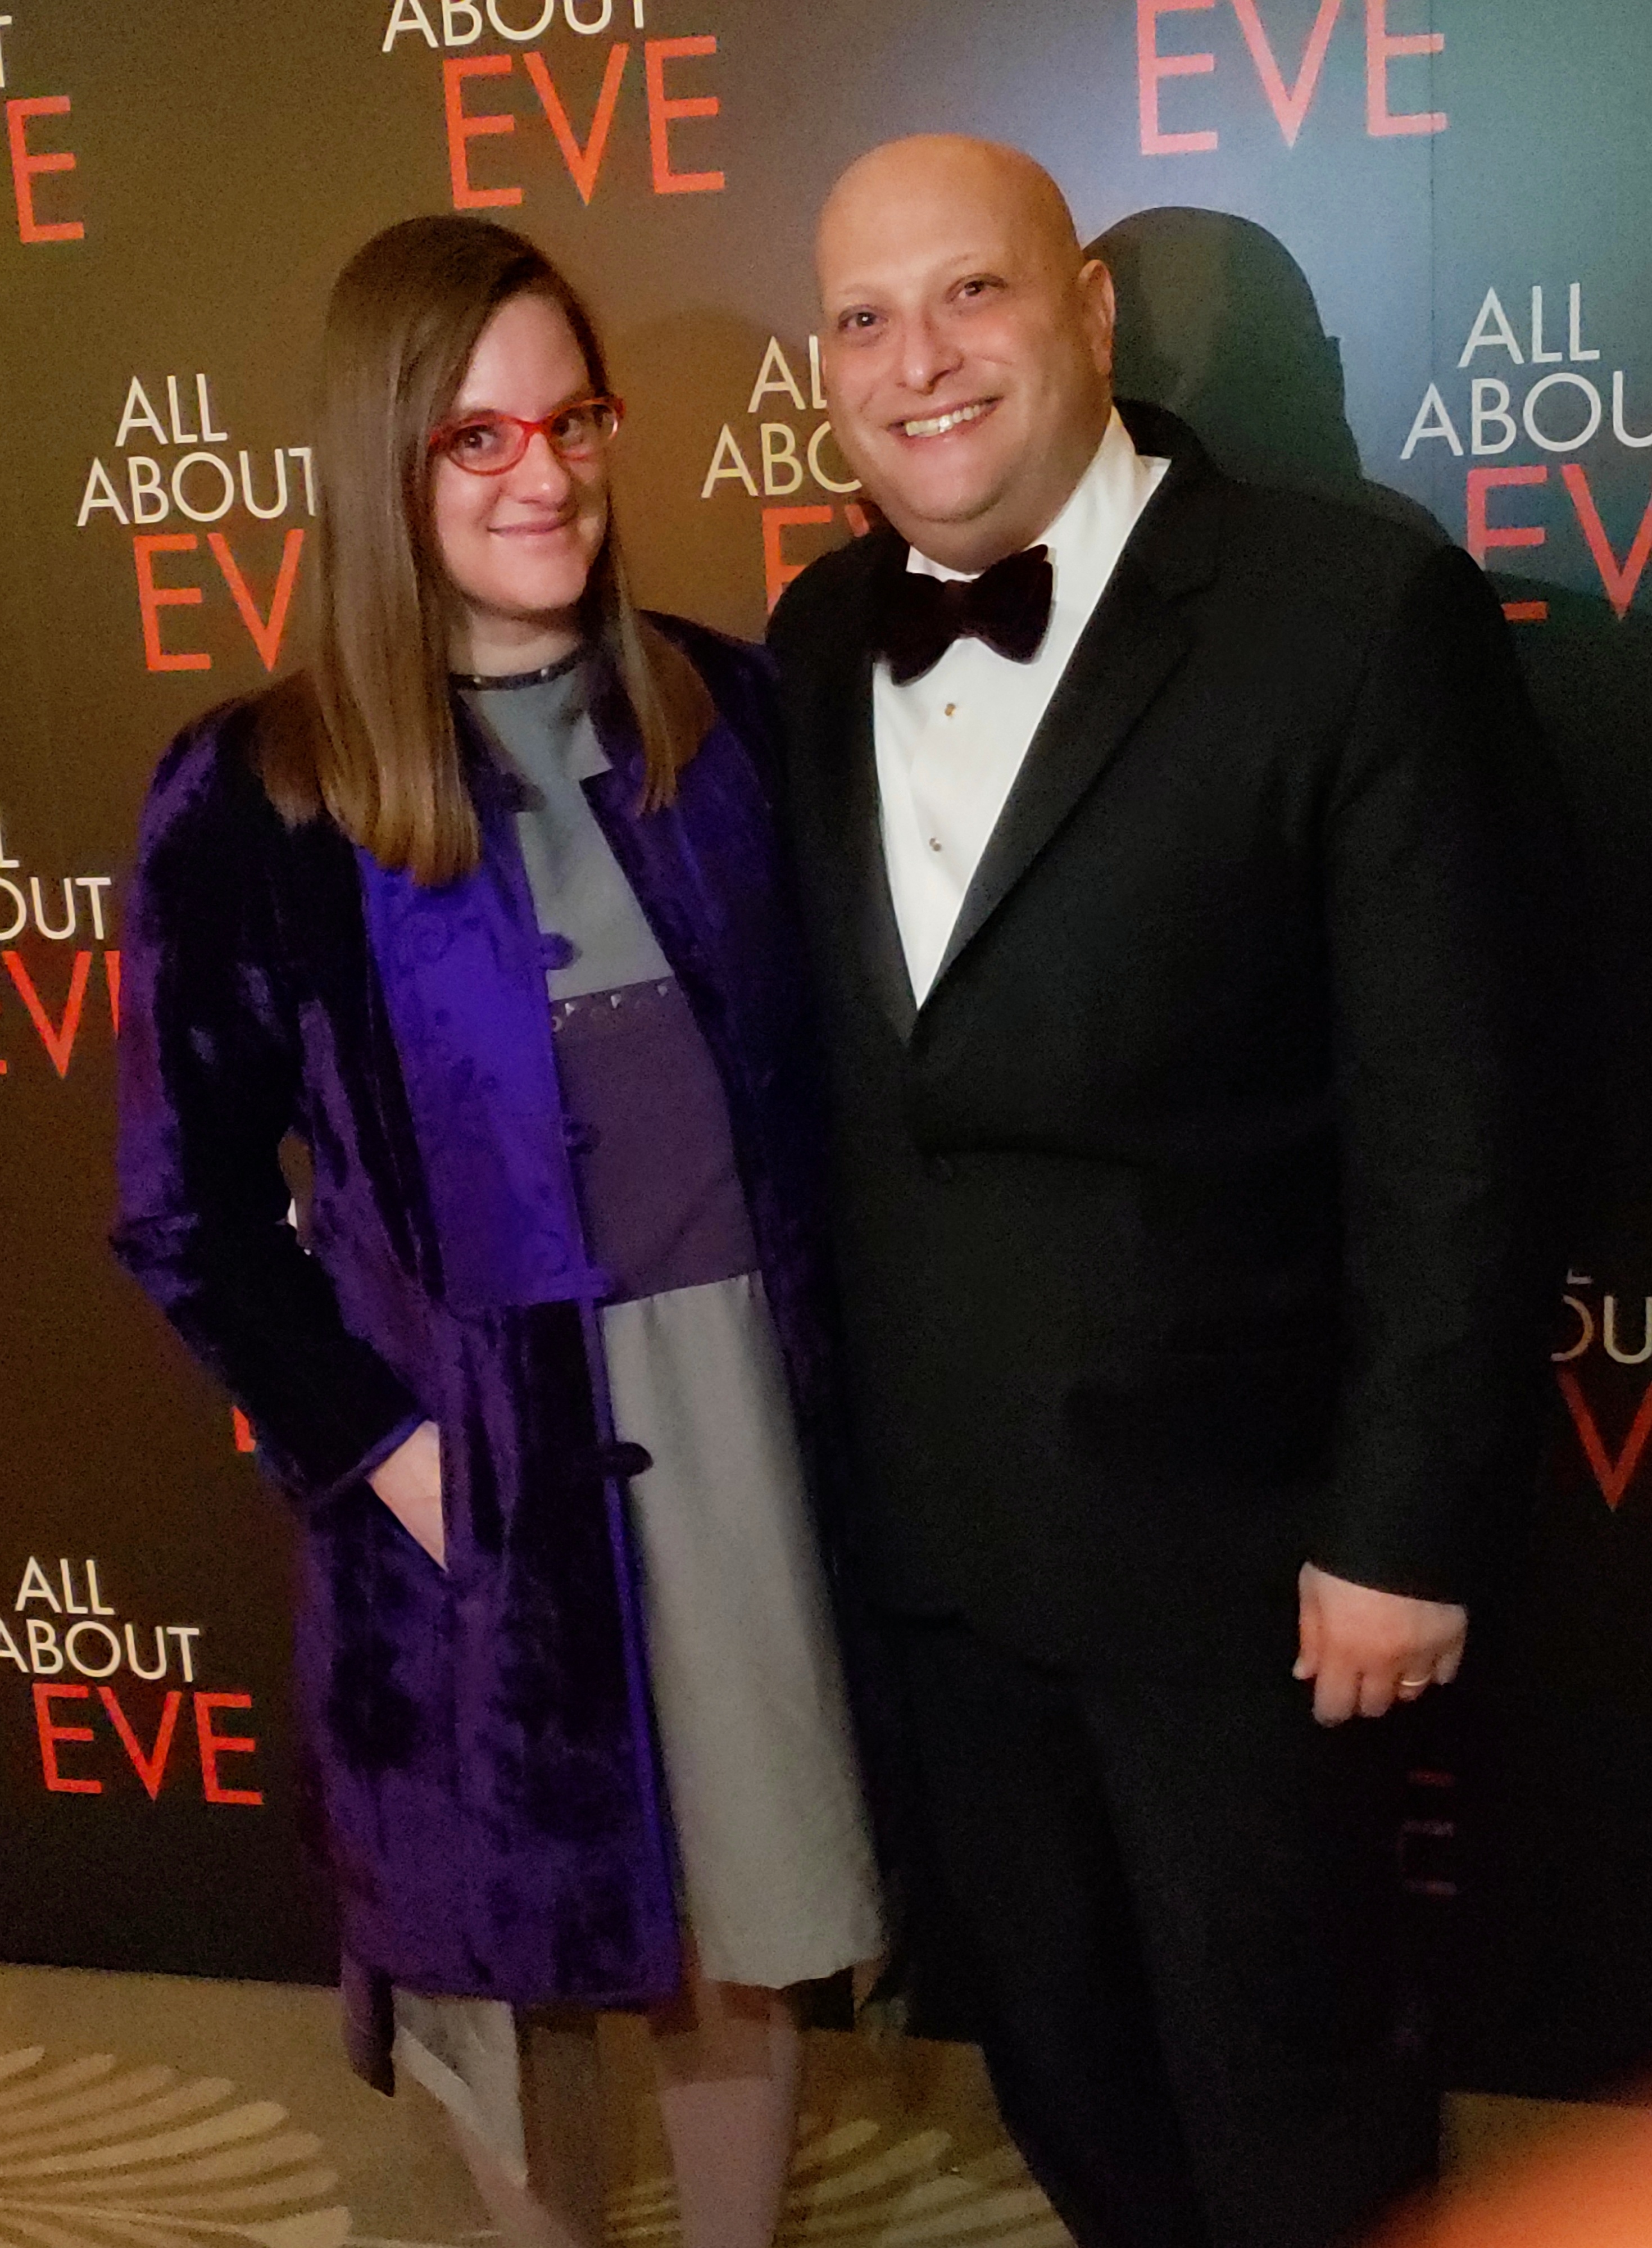 All About Eve premiere in London